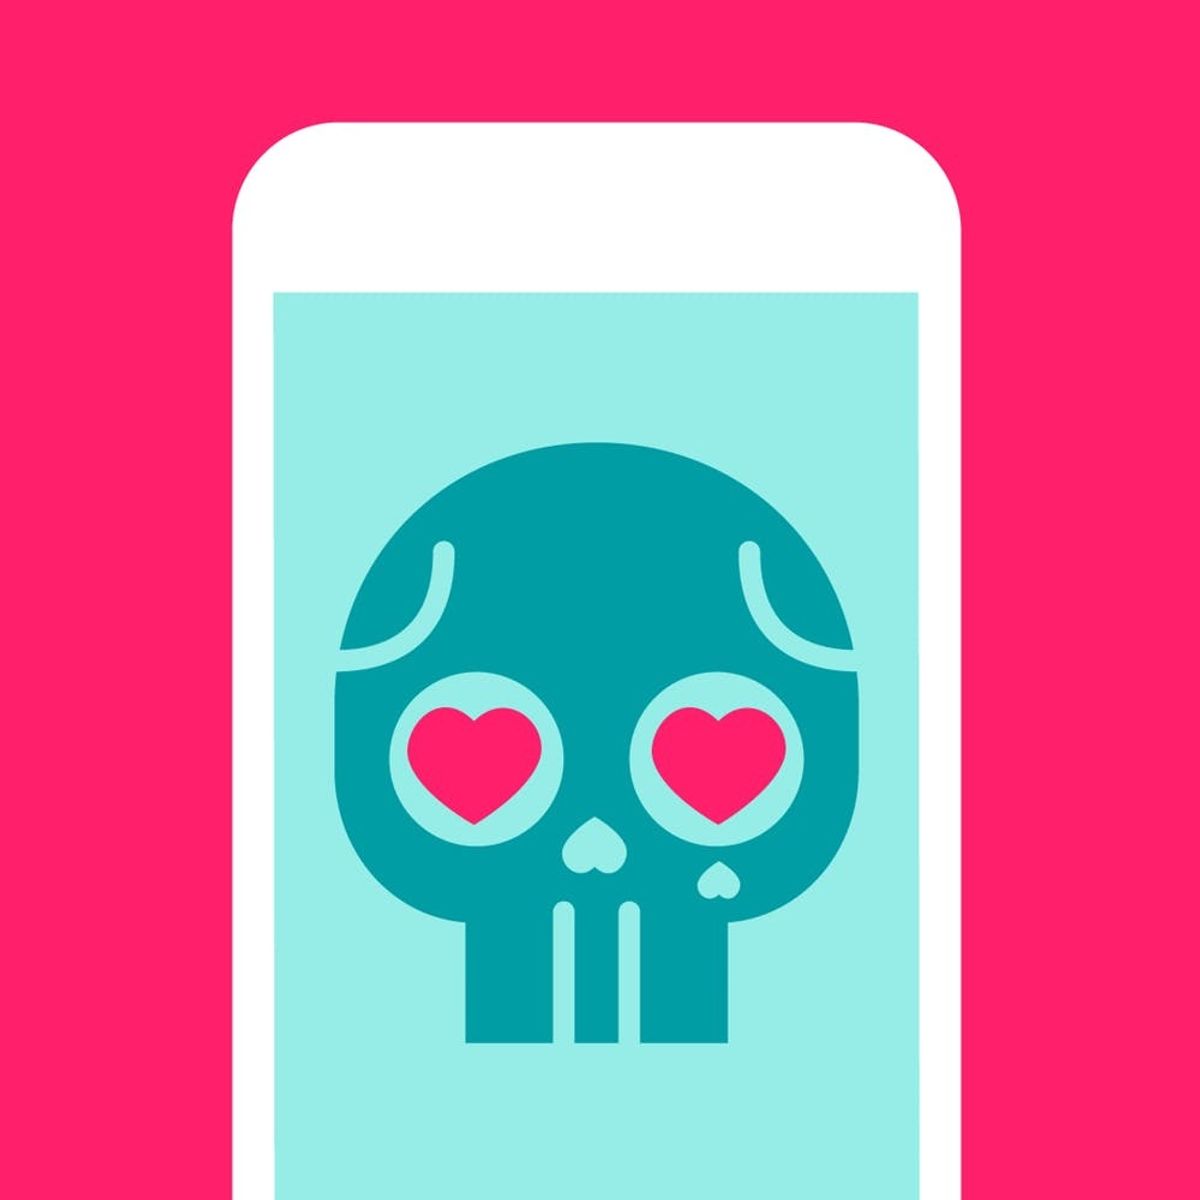 Online dating horror story - KEEP IT IN TH…